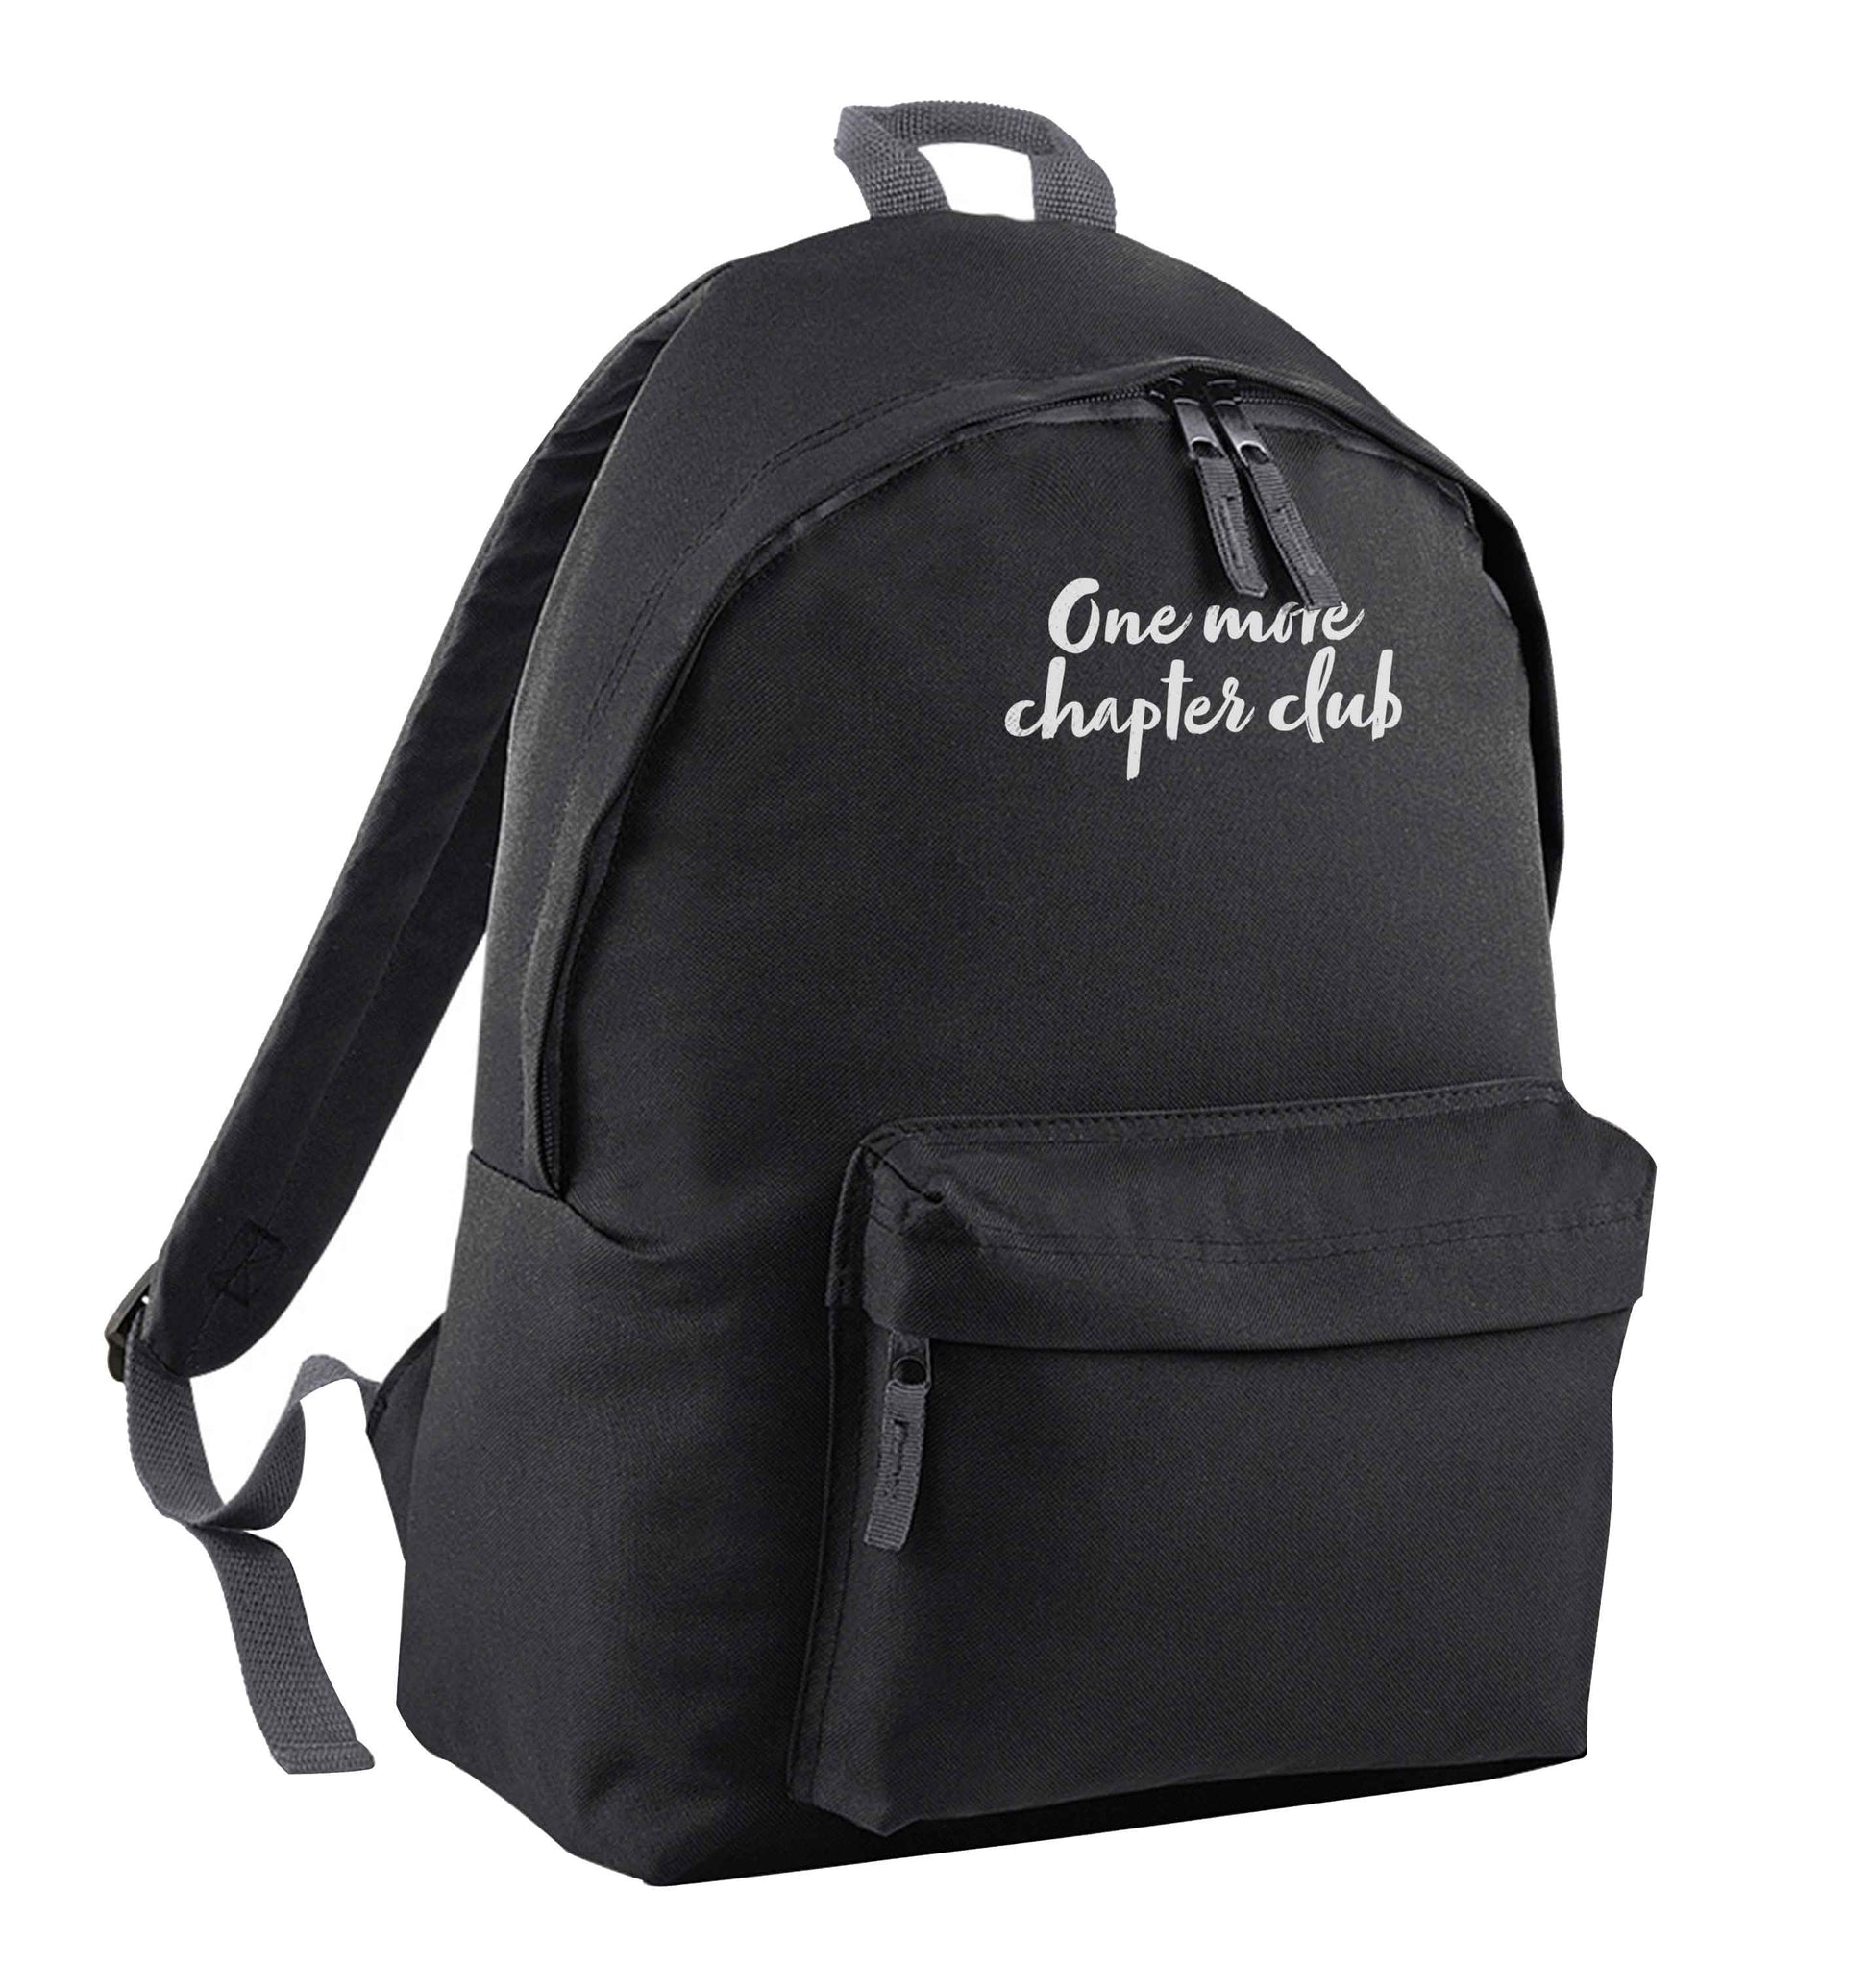 One more chapter club Kit black children's backpack